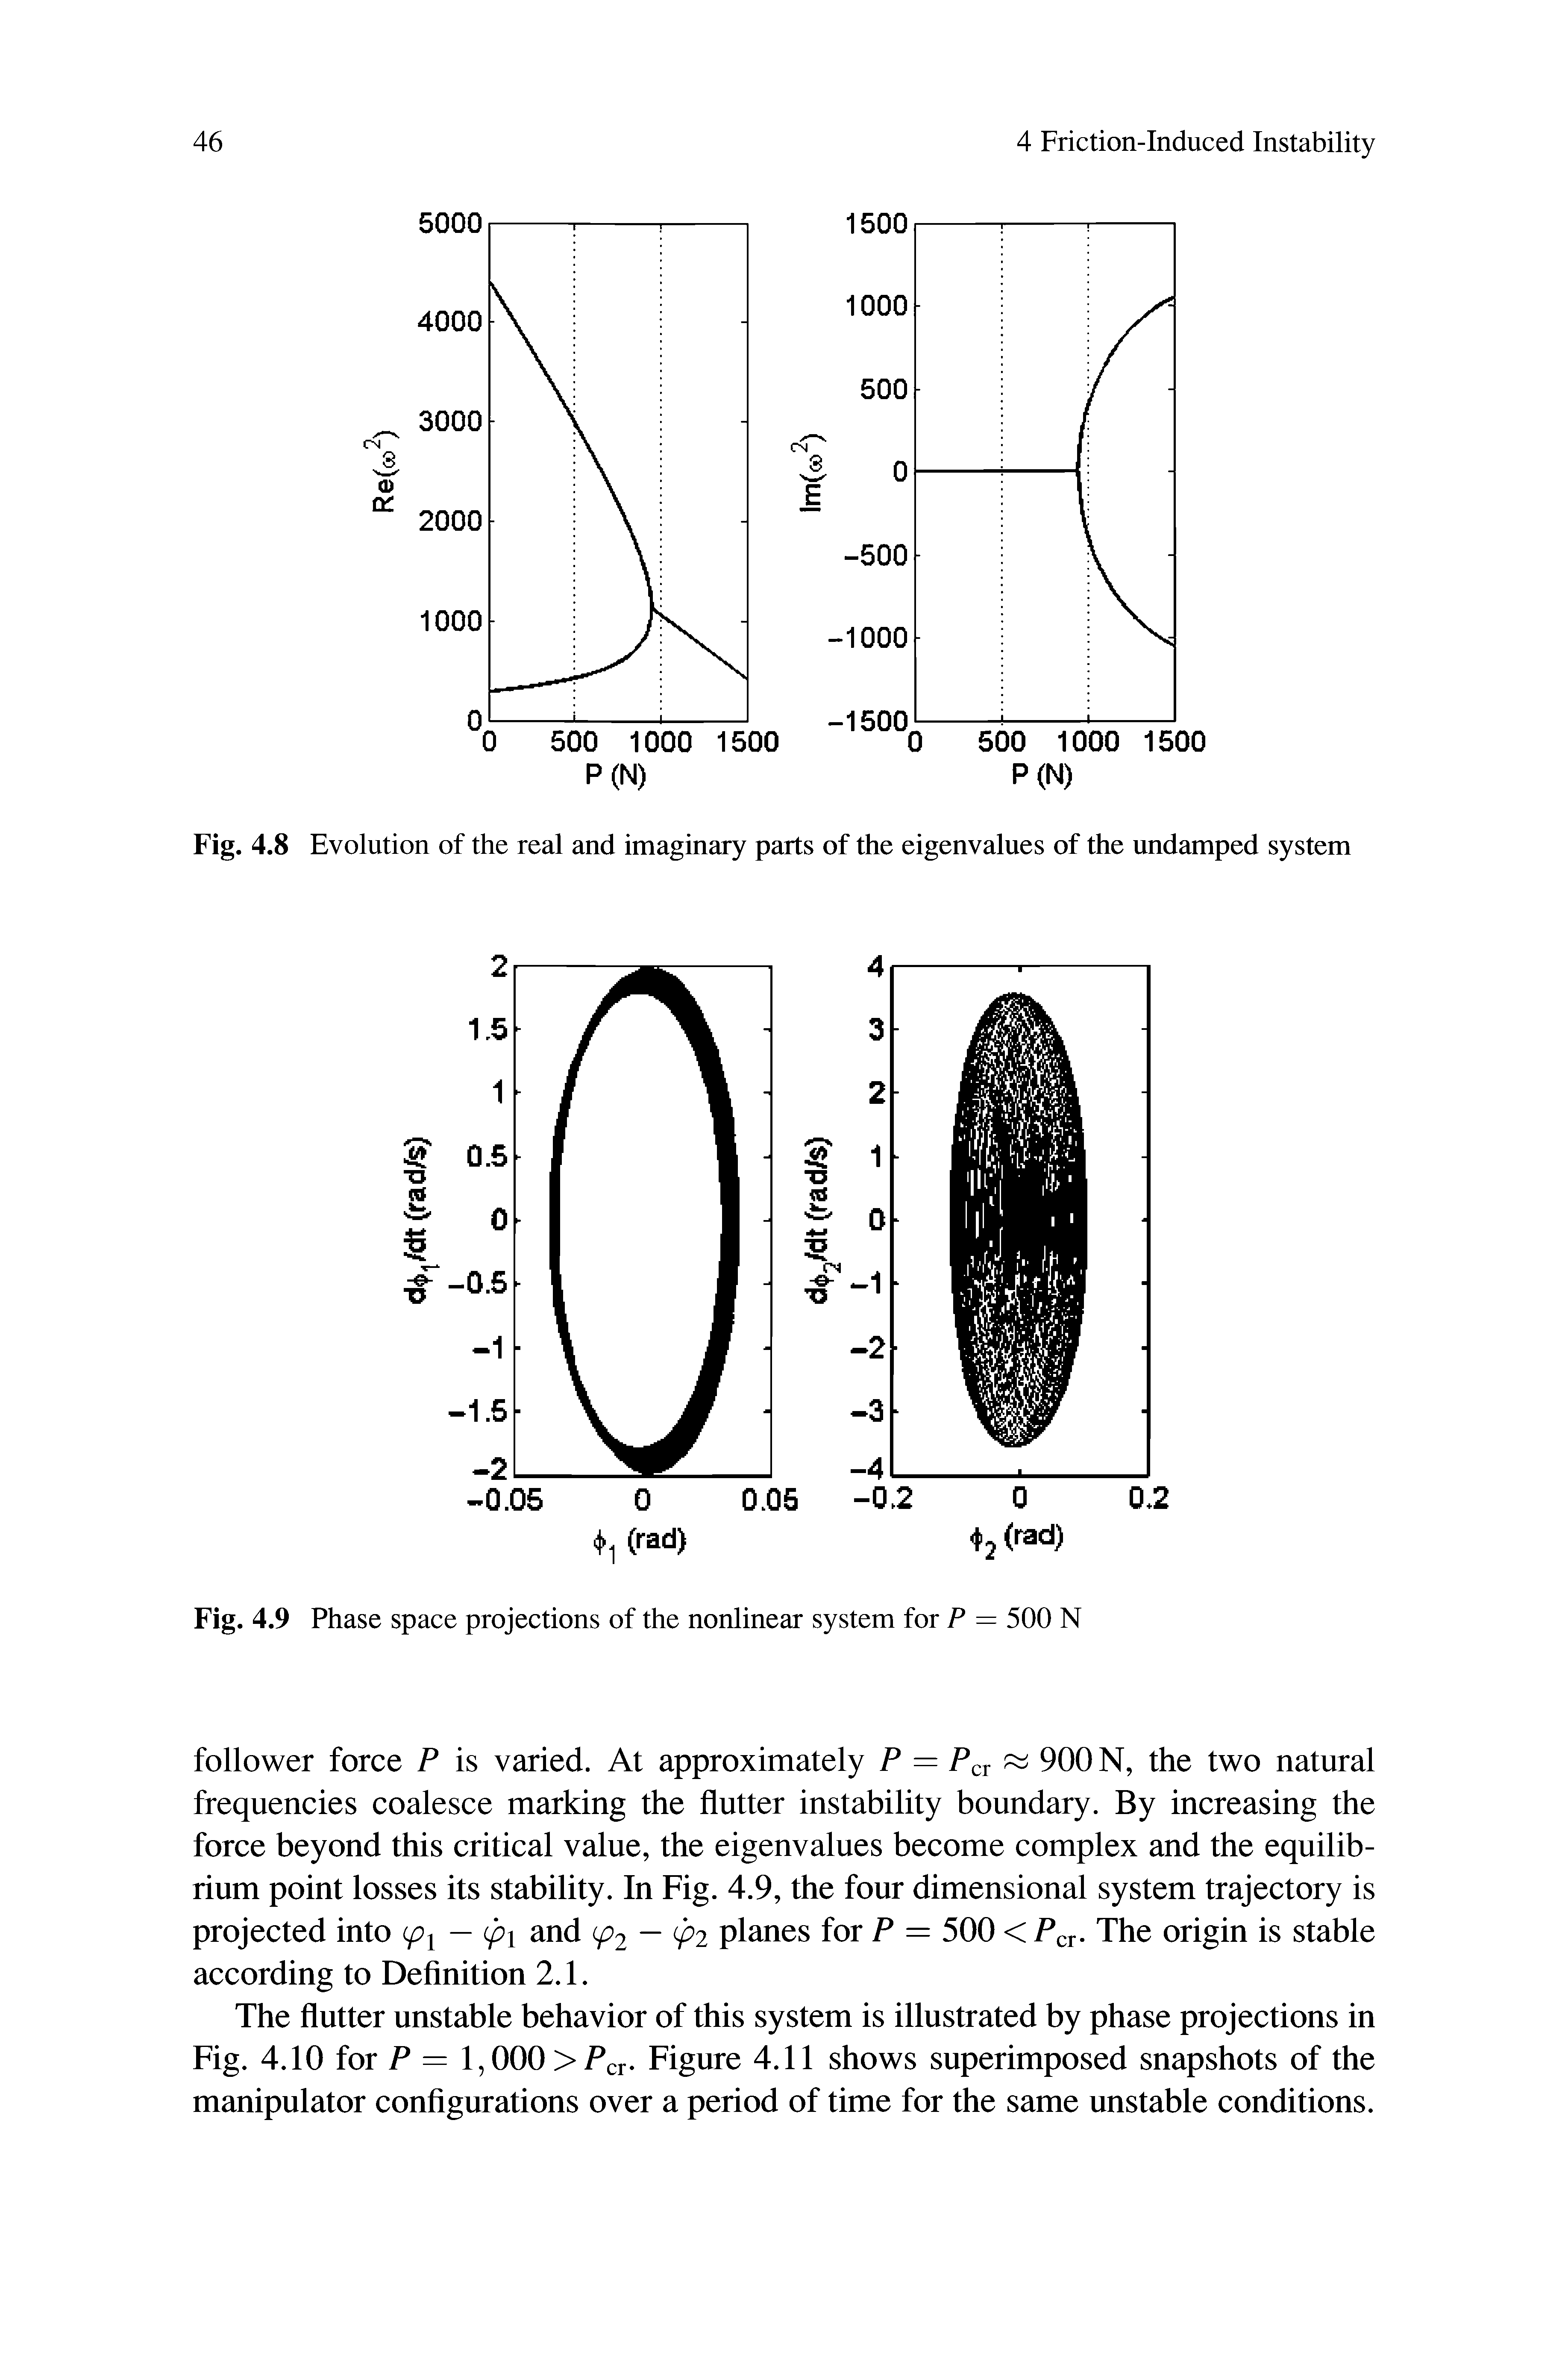 Fig. 4.8 Evolution of the real and imaginary parts of the eigenvalues of the undamped system...